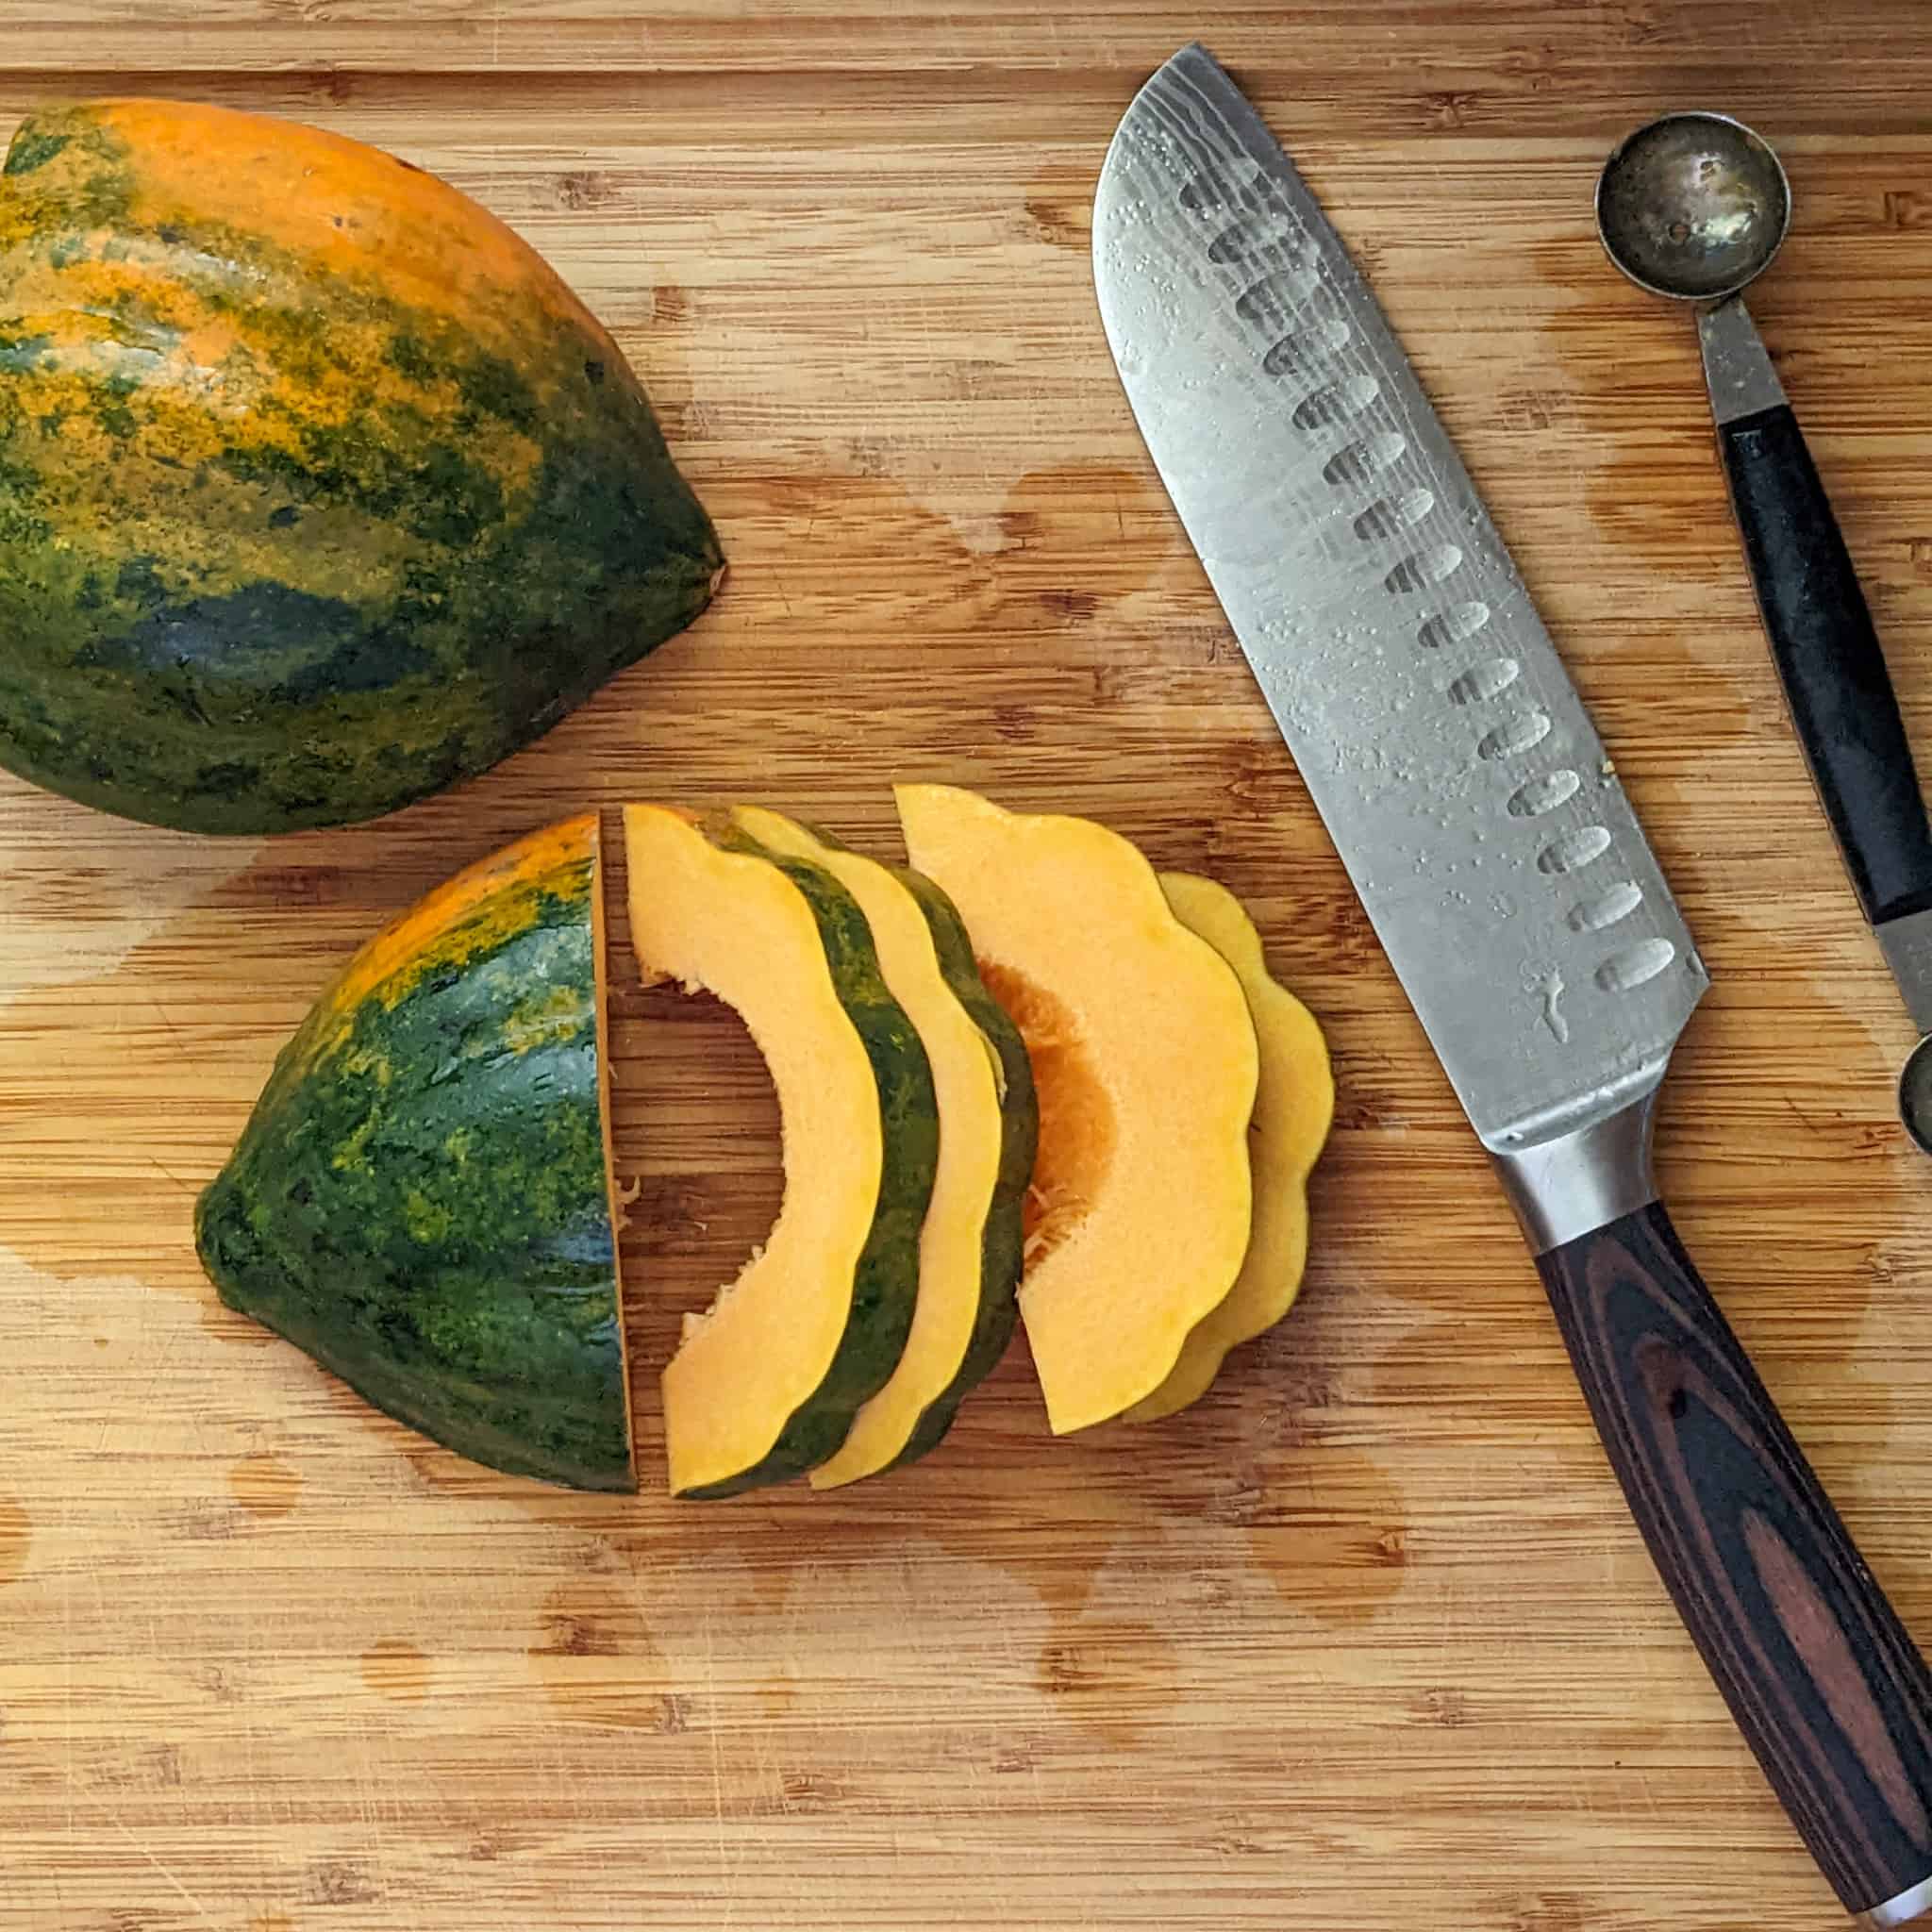 two halved acorn squash skin side up. one in whole while the other has been cut into sliced rings half way through laying on a cutting board next to a knife